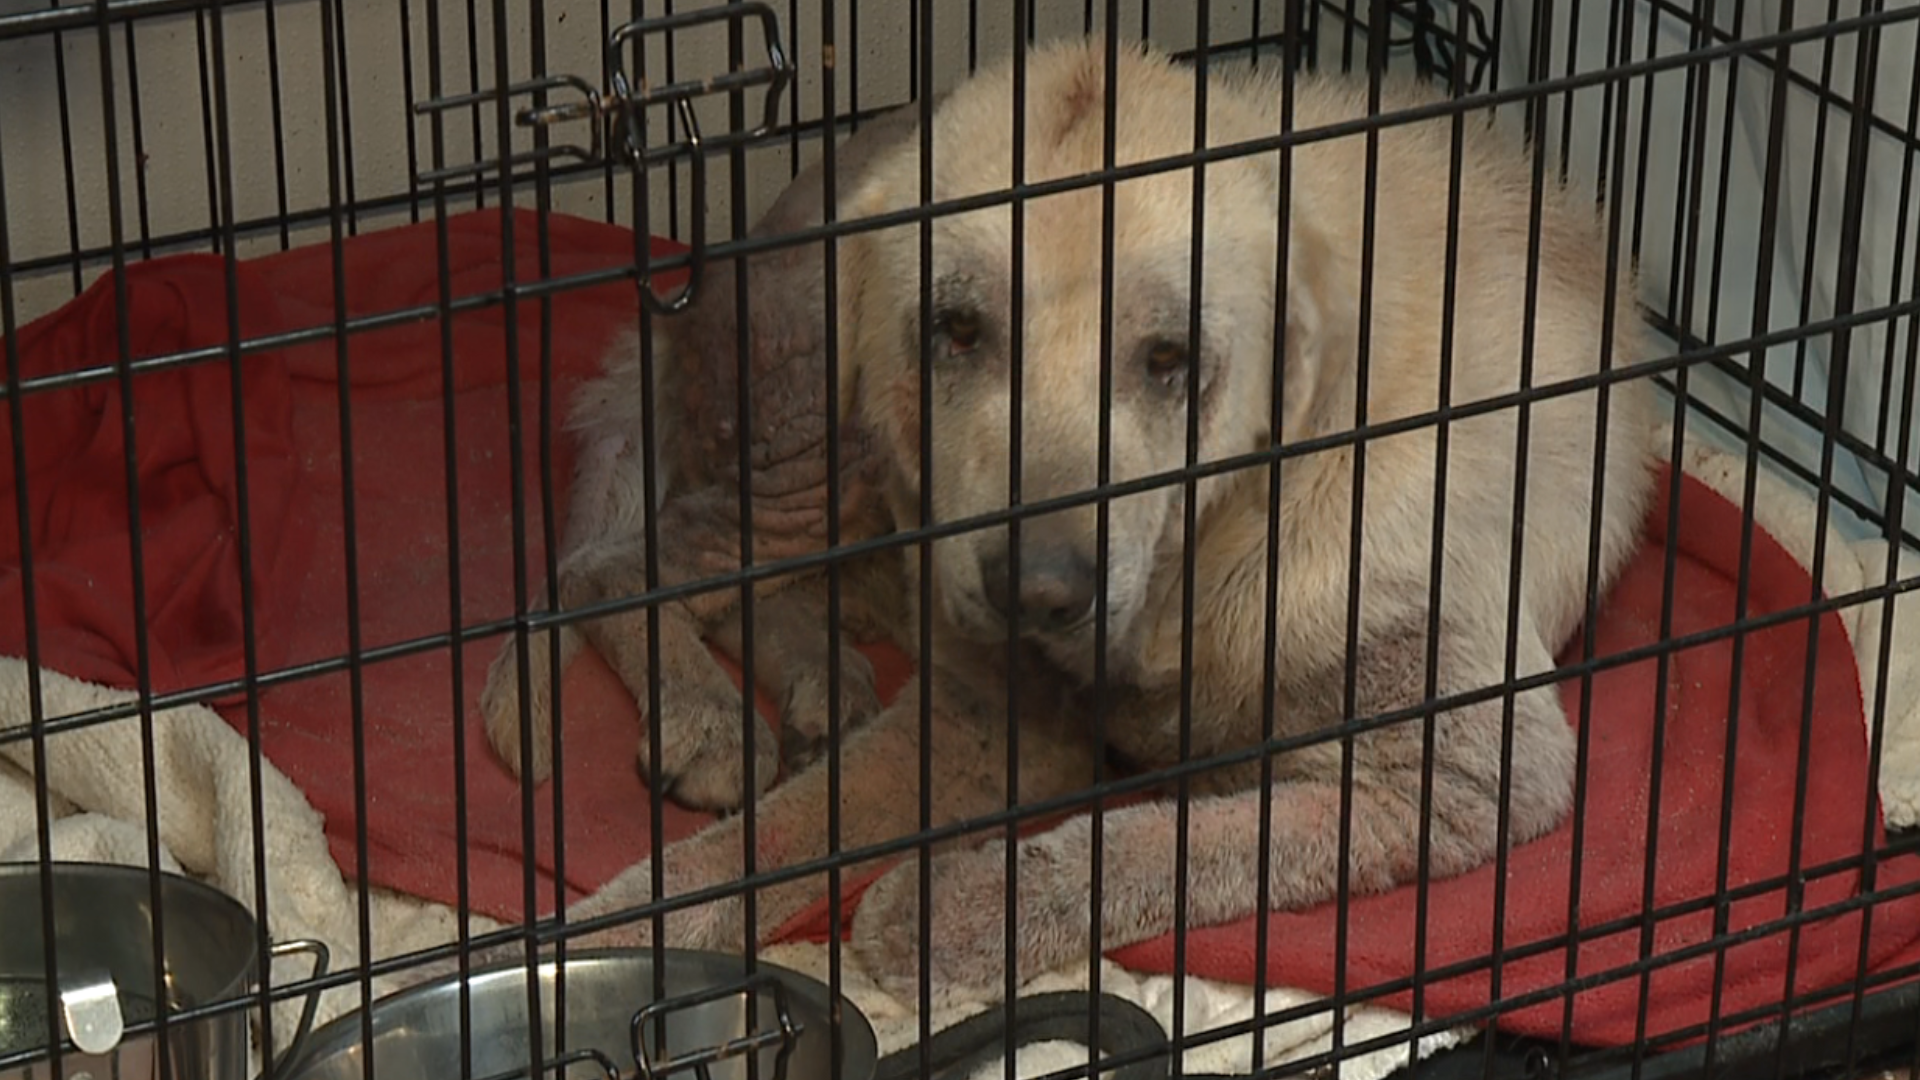 Animal rescuers in Luzerne County are searching for answers while caring for a dog they say has likely been through years of neglect.